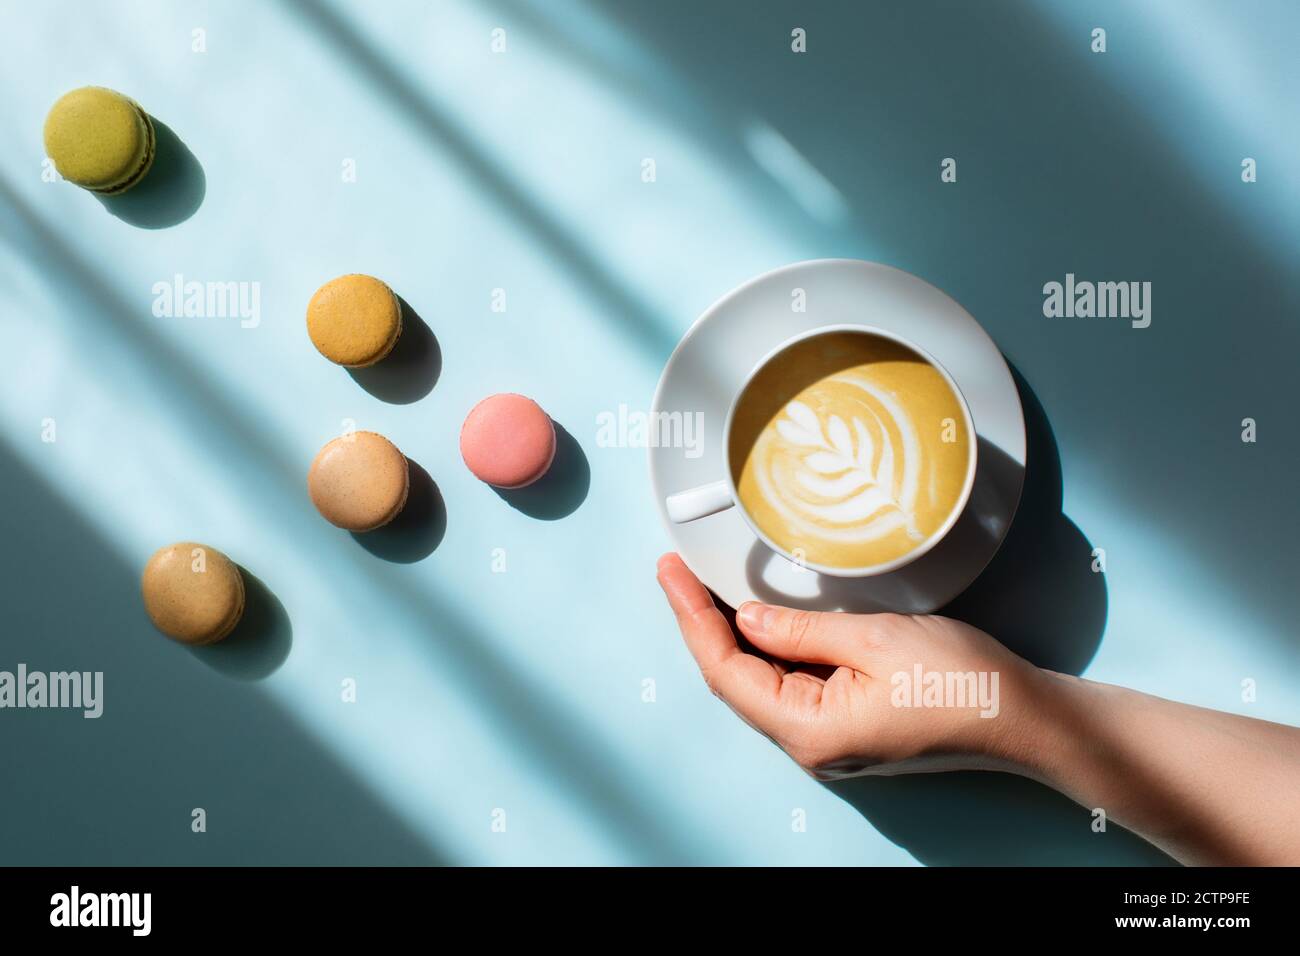 Morning coffee in a woman's hand with delicious macaroons scattered around in the sunlight. Stock Photo